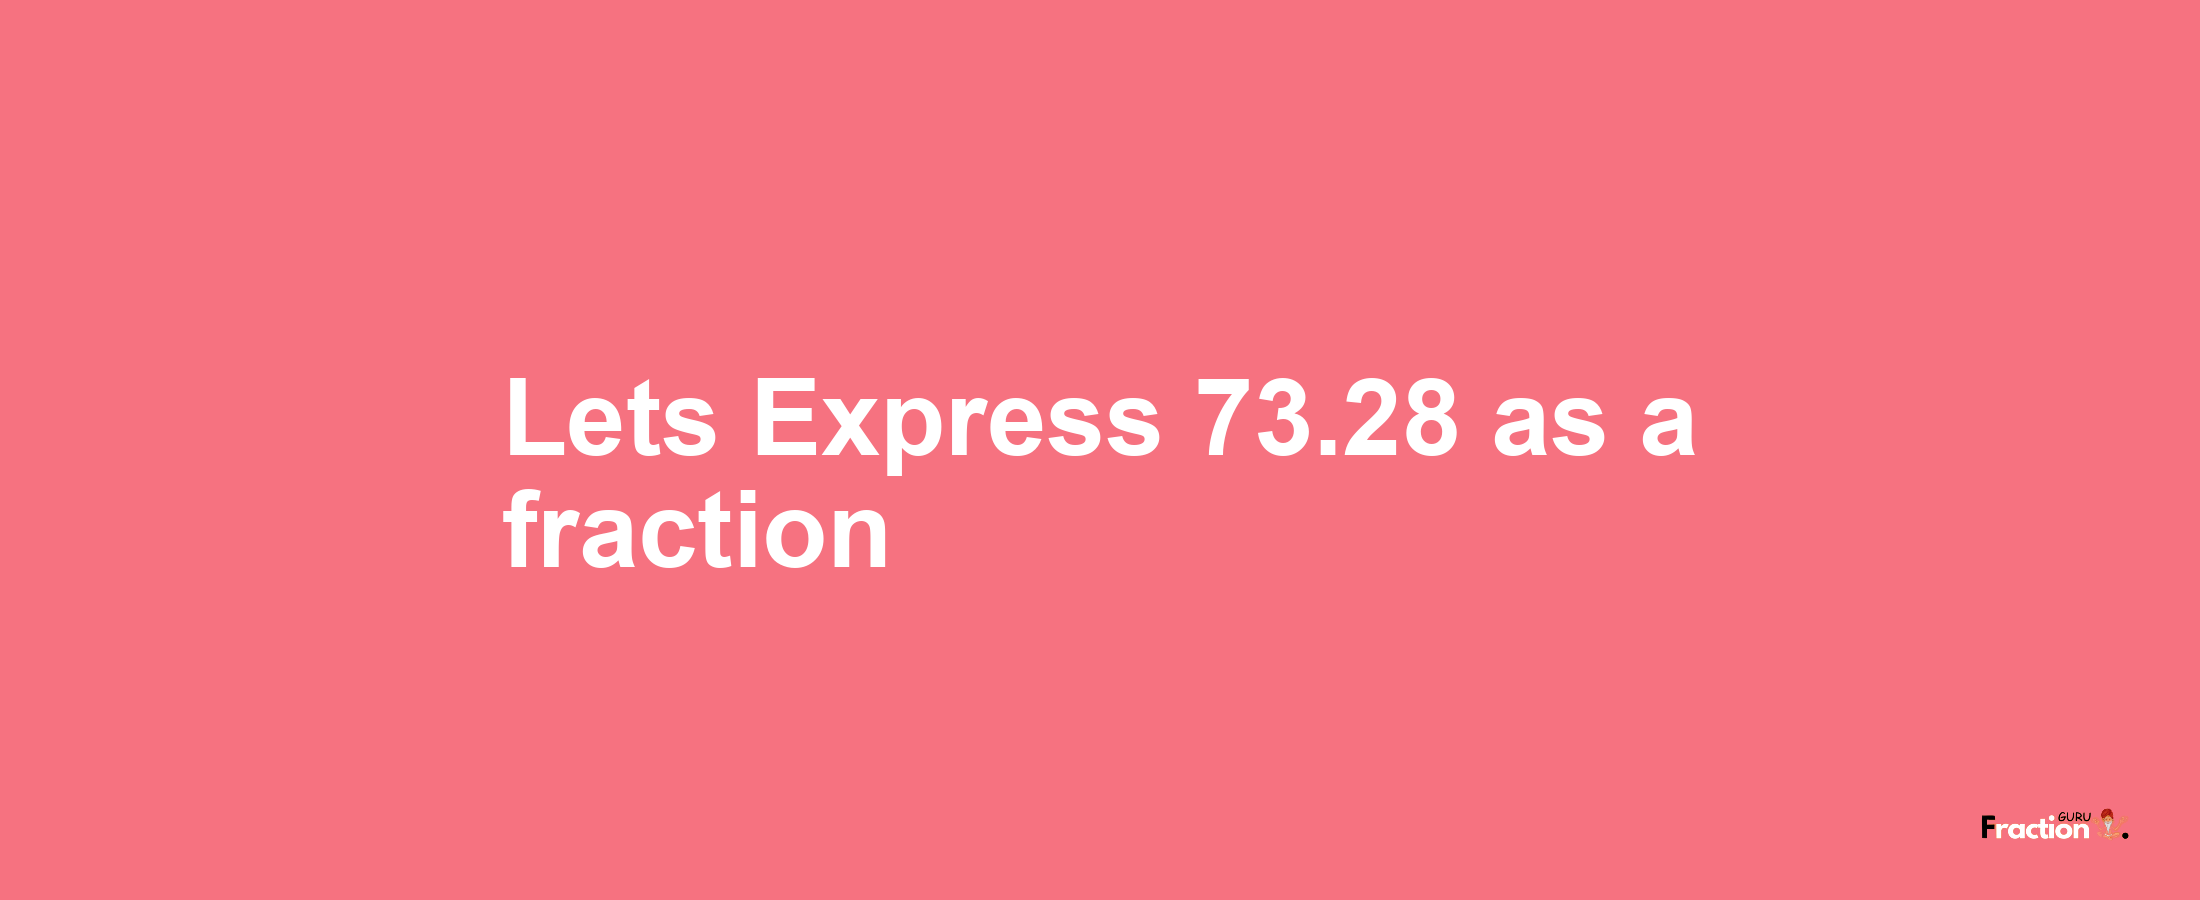 Lets Express 73.28 as afraction